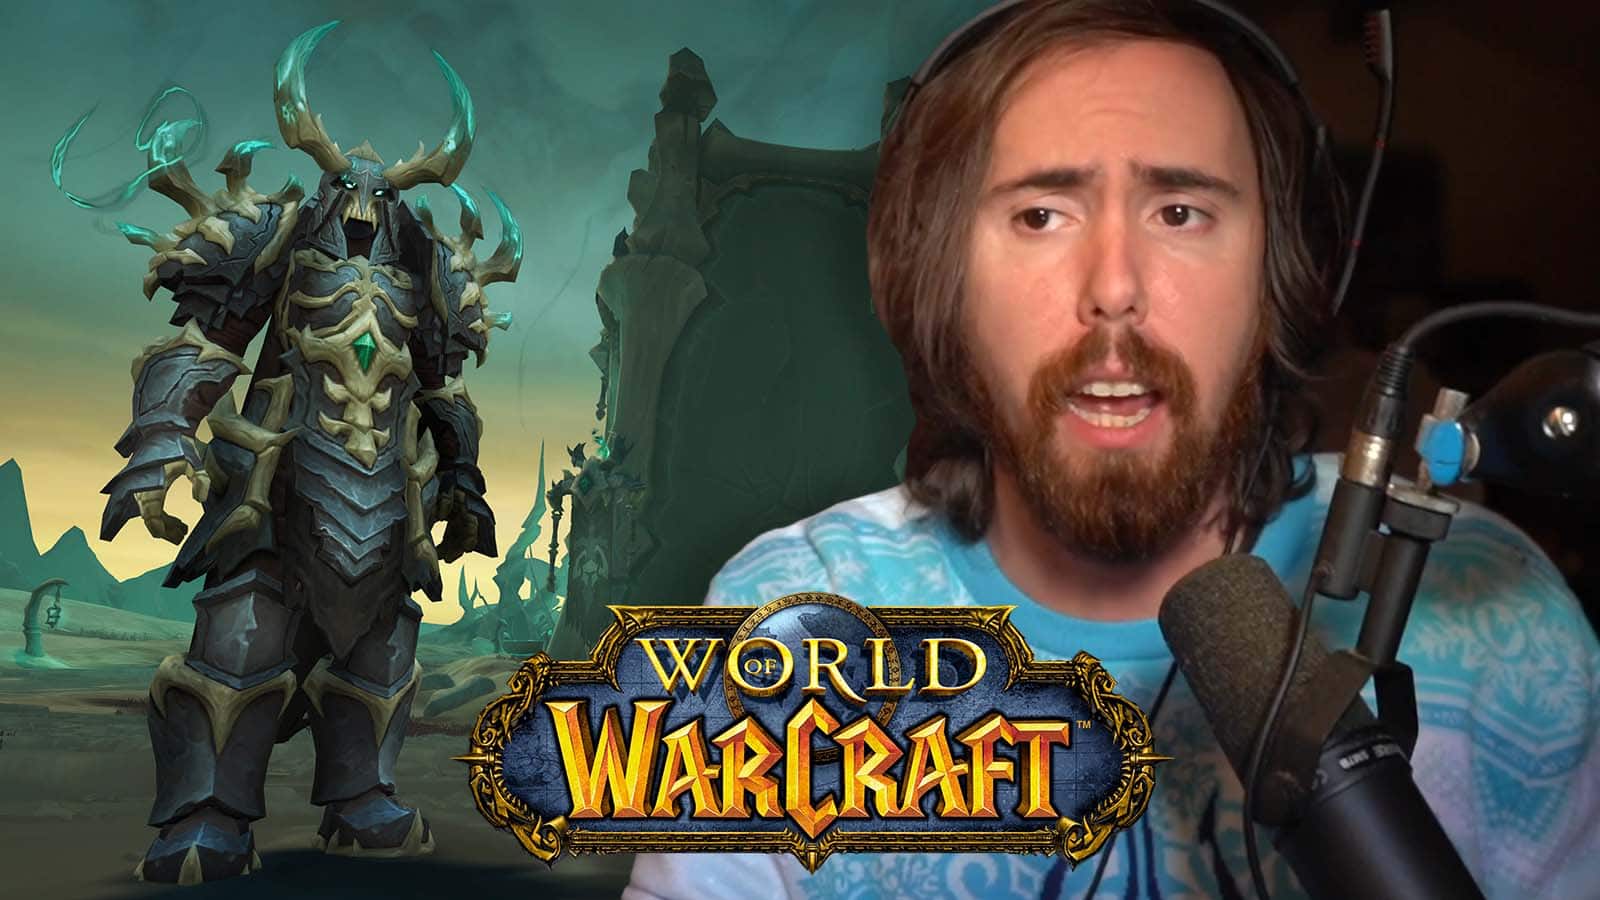 Asmongold shuts down claims he abandoned World of Warcraft: “I did not quit” - Dexerto